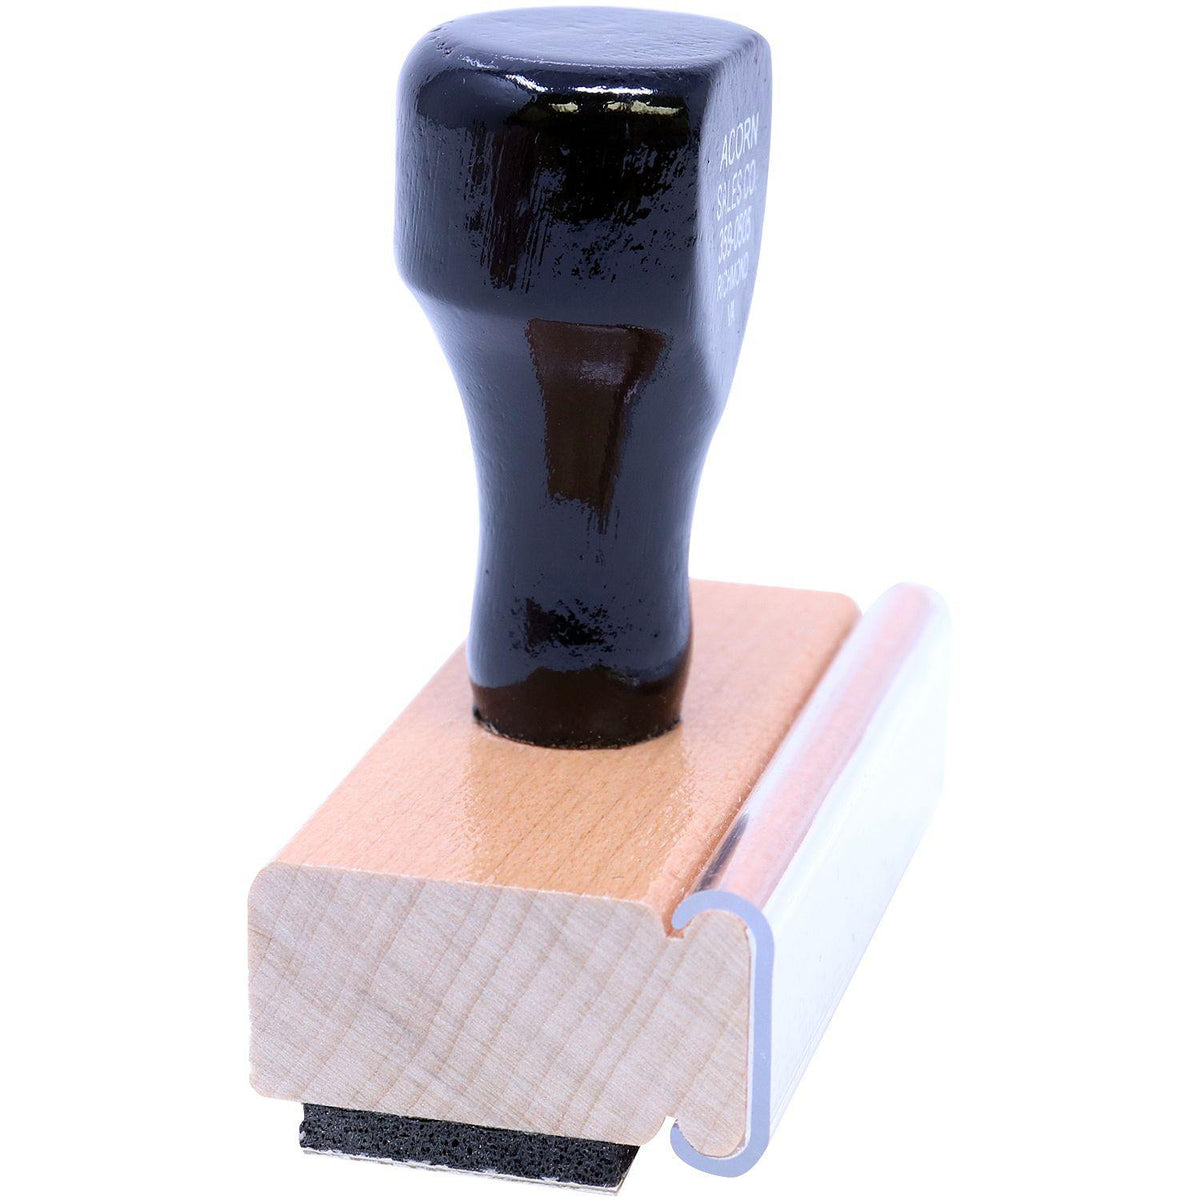 Side View of Star Rubber Stamp at an Angle